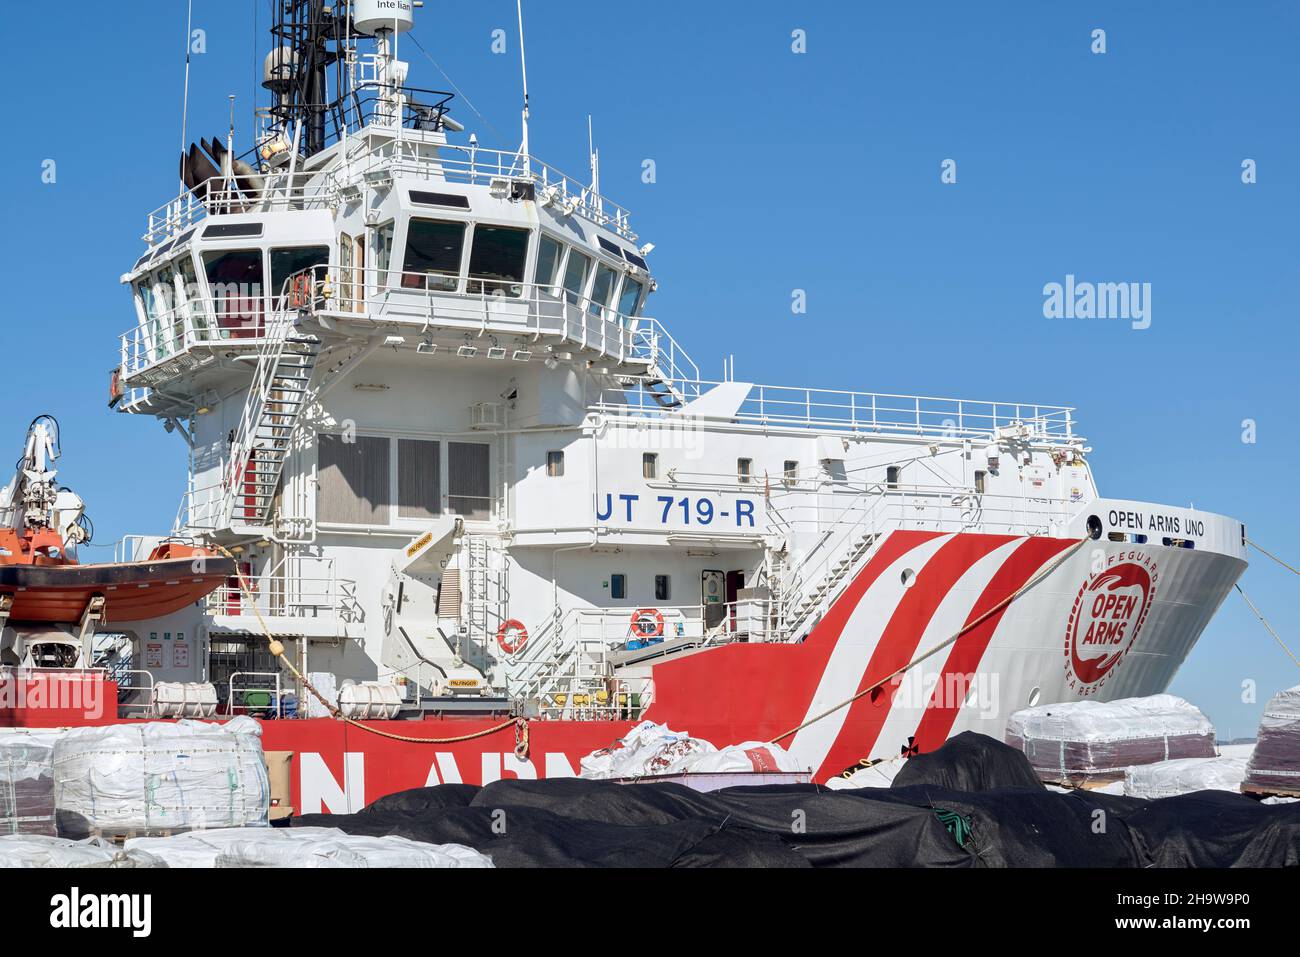 The rescue ship Proactiva 'Open Arms Uno', the imposing boat of the NGO for the 'massive rescue' moored at the dock of the port of the Burriana town, Stock Photo